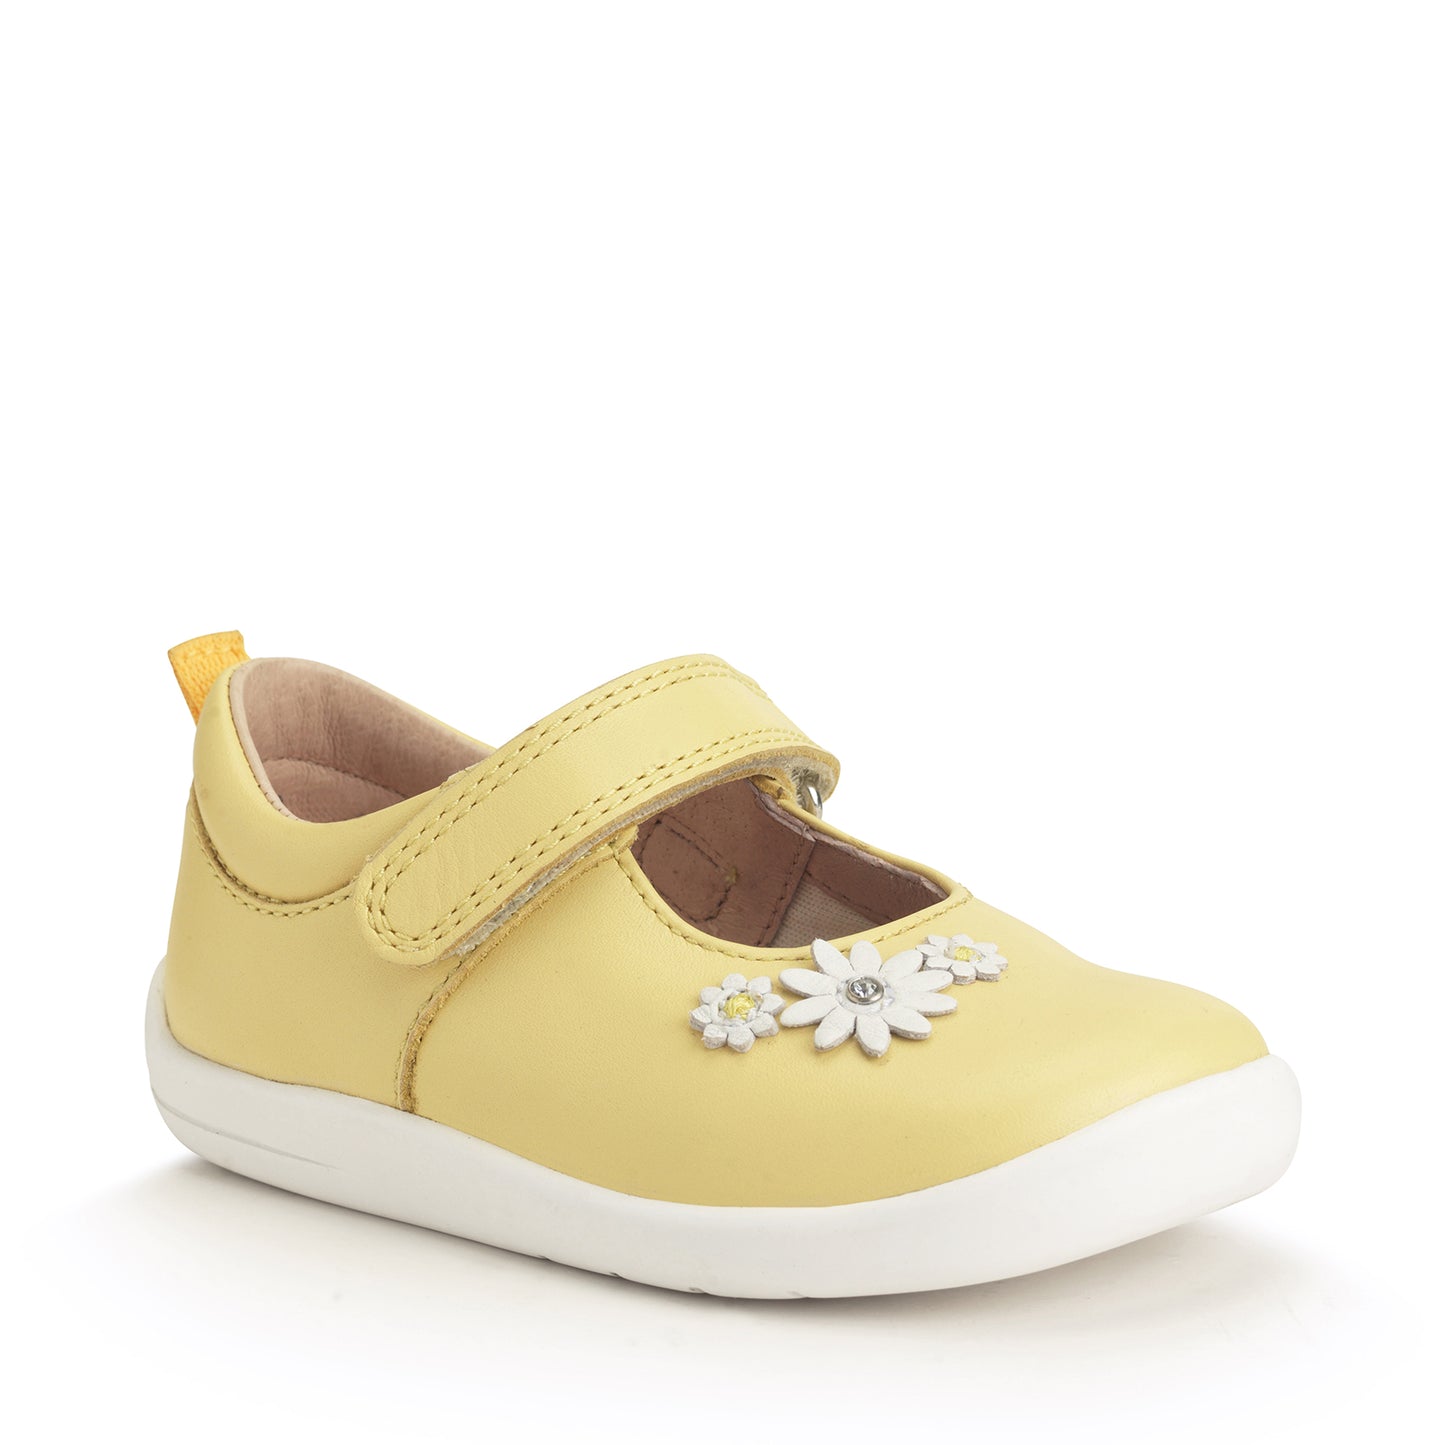 Fairy Tale Yellow Leather Girl's Riptape First Walking Shoe